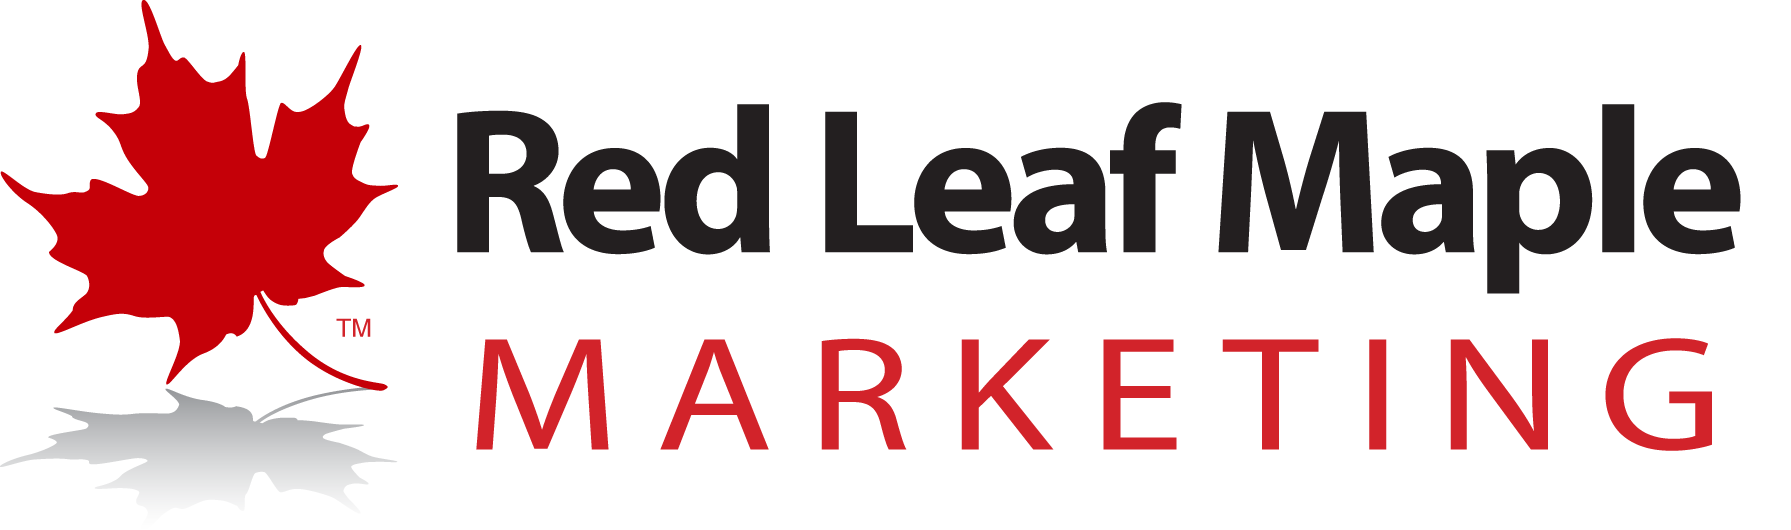 Red Leaf Maple Marketing - Practical. Effective. Communications.